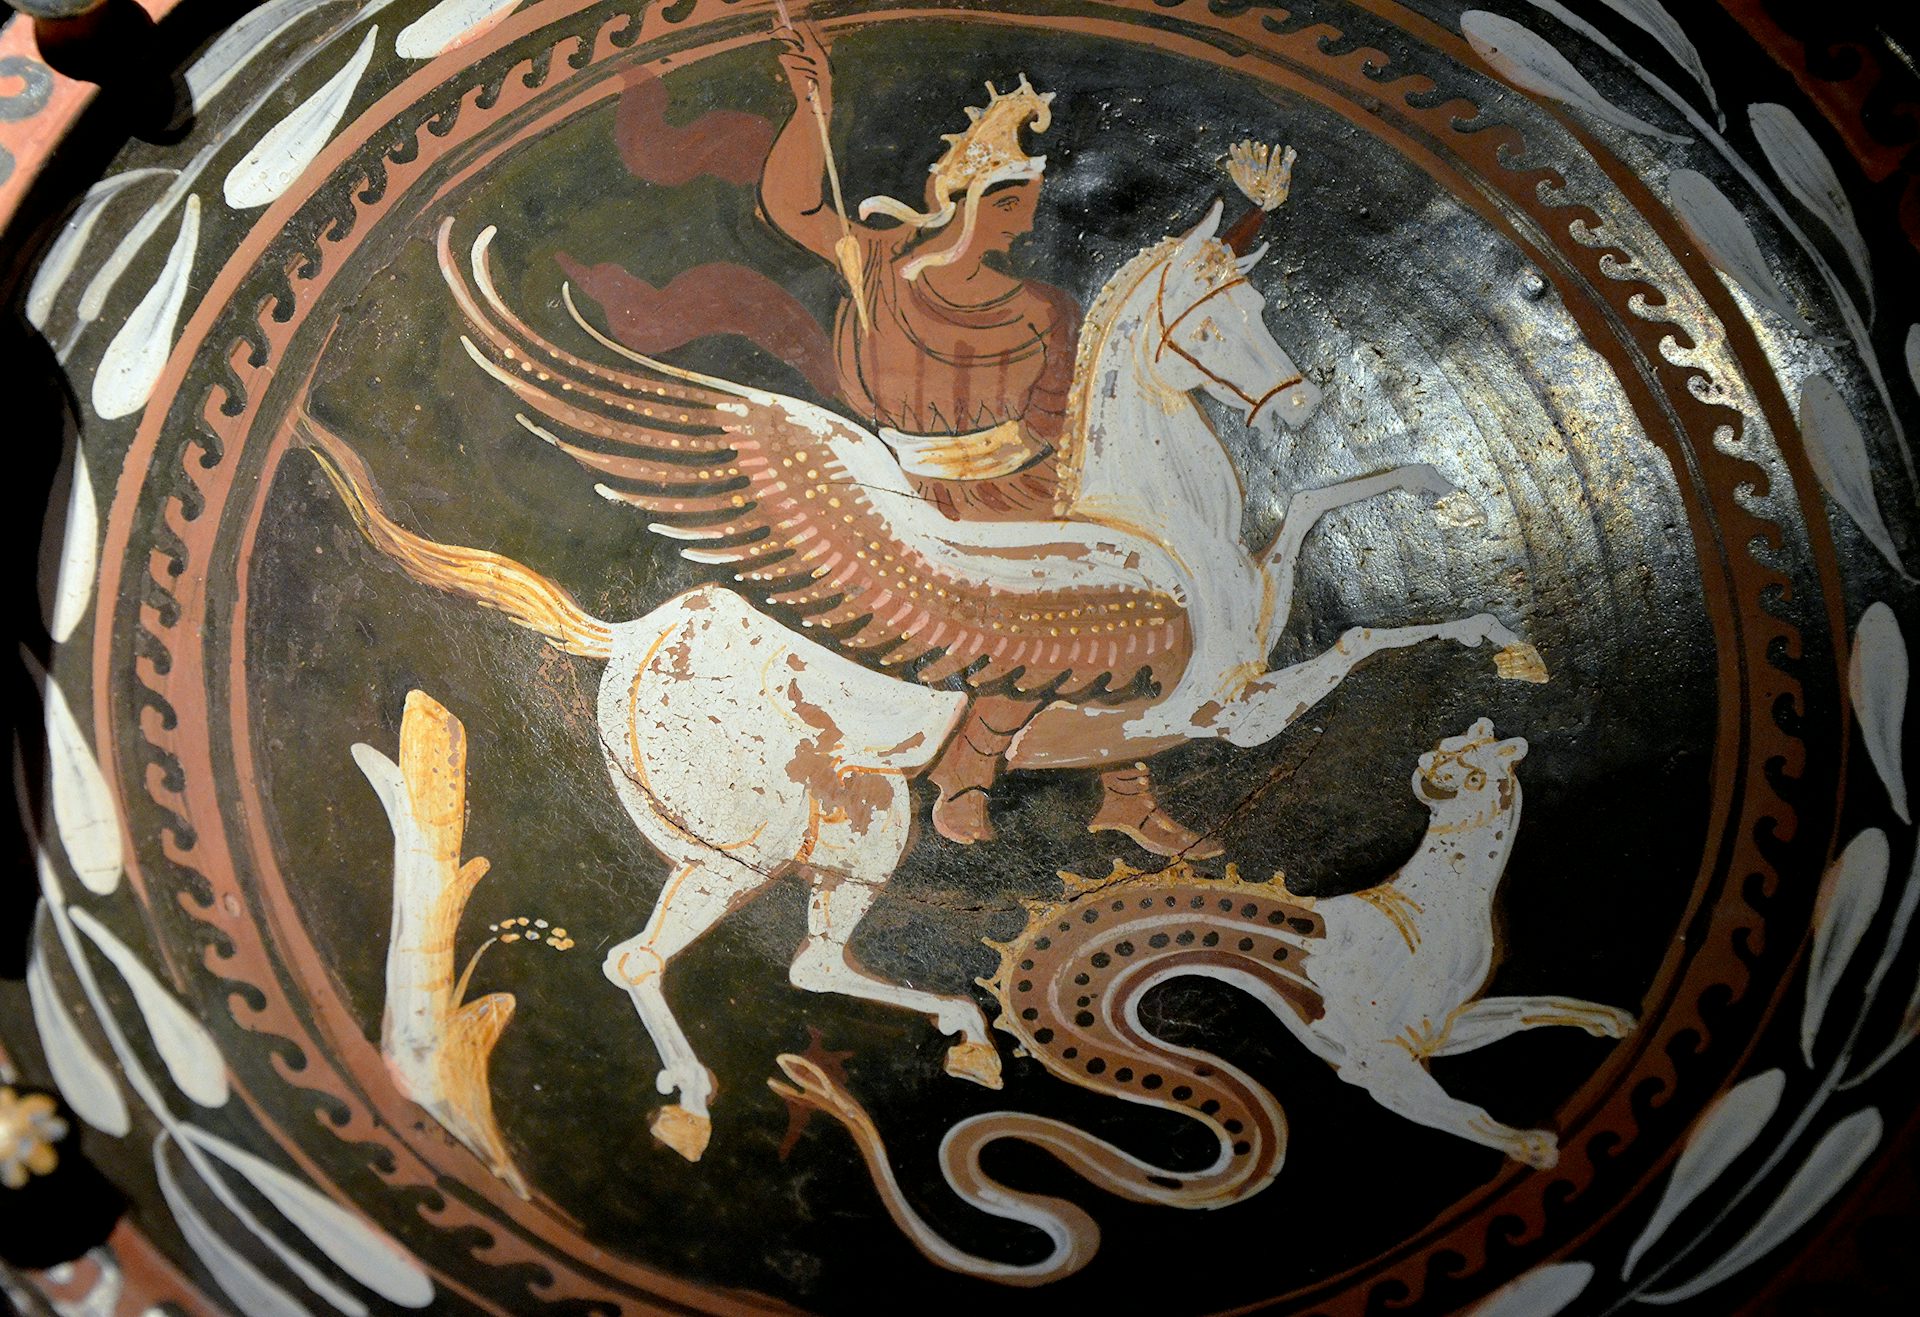 Plate showing Bellerophon riding Pegasus and a chimera, 4th century bce